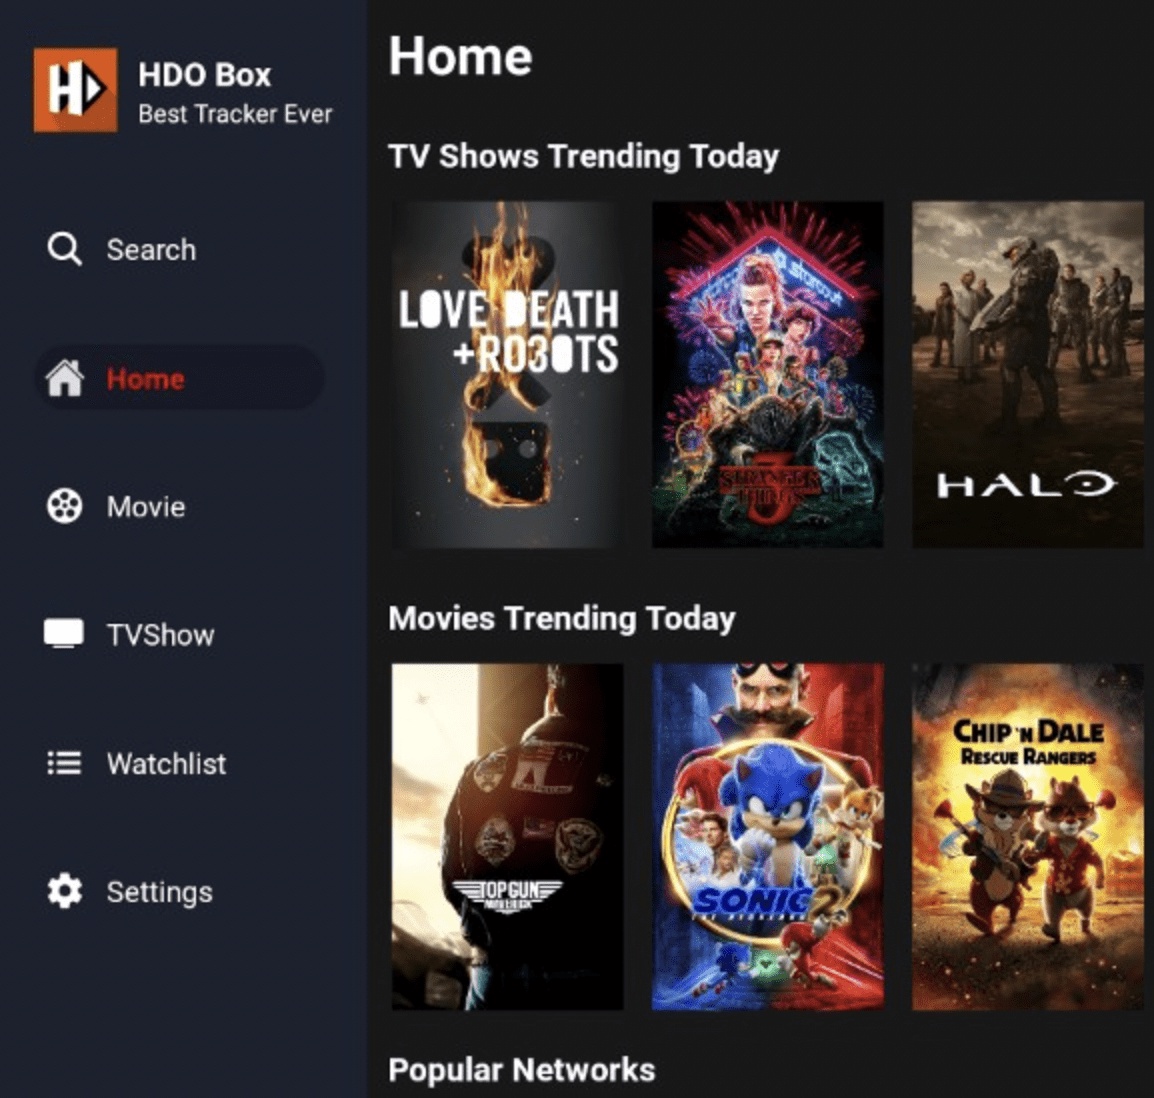 Experience Entertainment Excellence with HDO Box on Your Smart TV